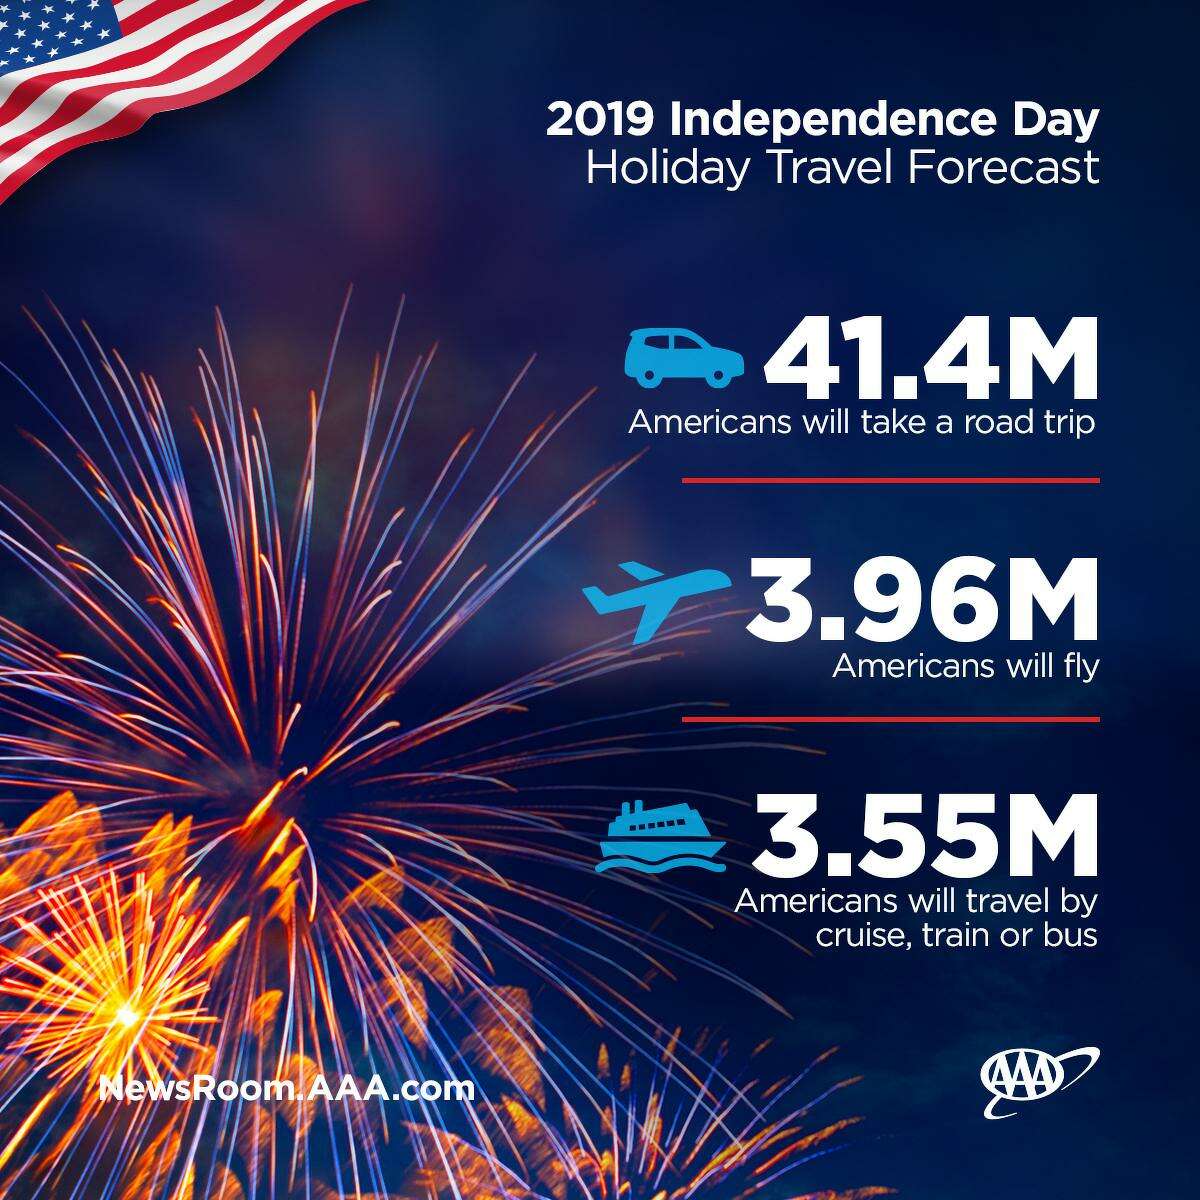 More than 49 million expected to travel over July 4 holiday